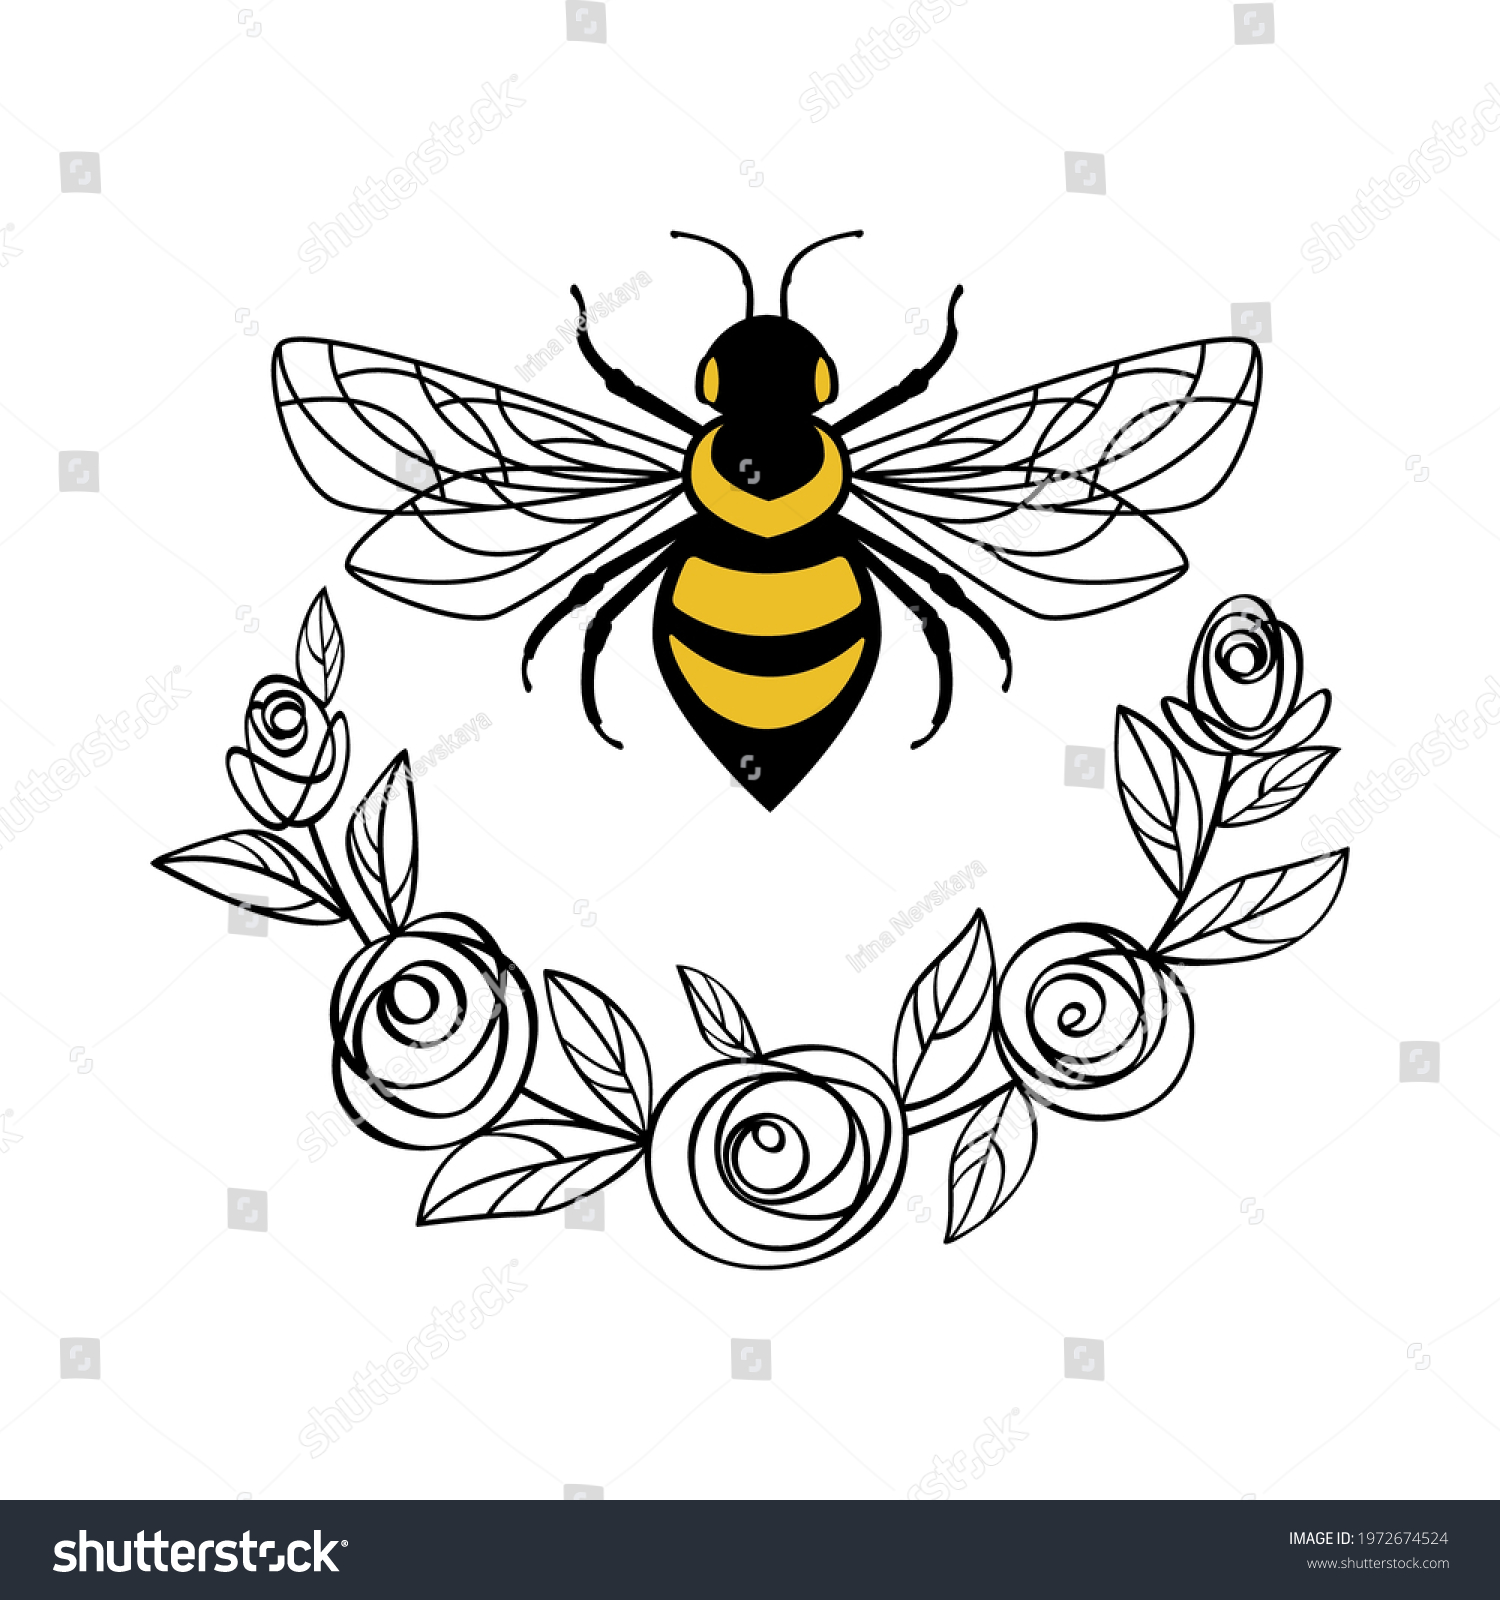 SVG of Honey bee in a flower frame. Floral frame wreath made of rose flowers and leaves. Suitable for cutting SVG files on a plotter. Bumblebee for t-shirt design svg